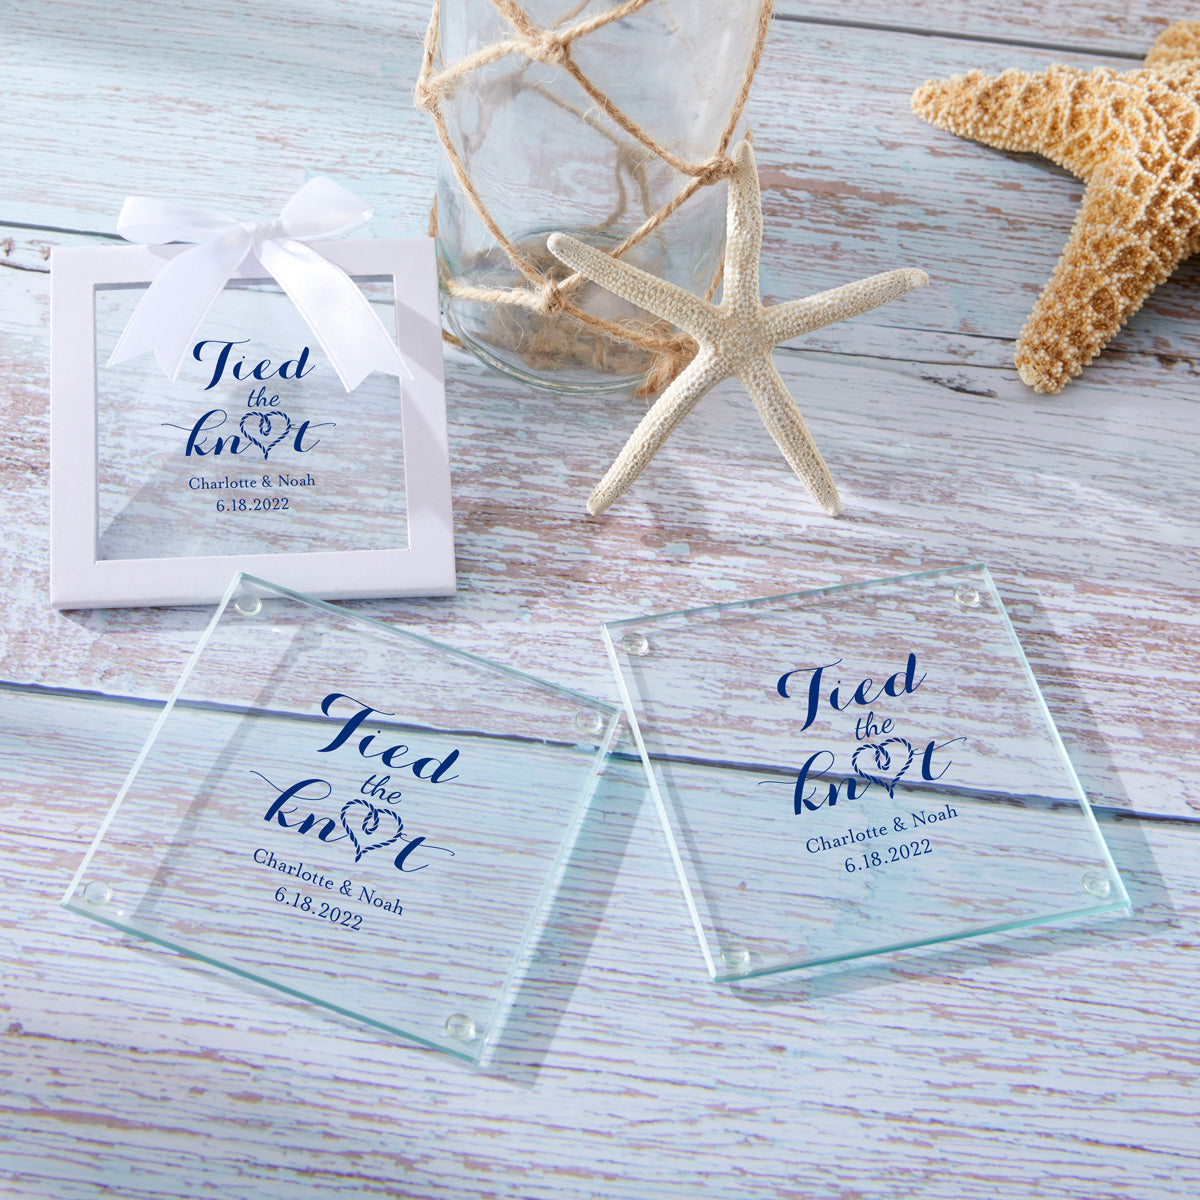 Personalized Glass Coasters